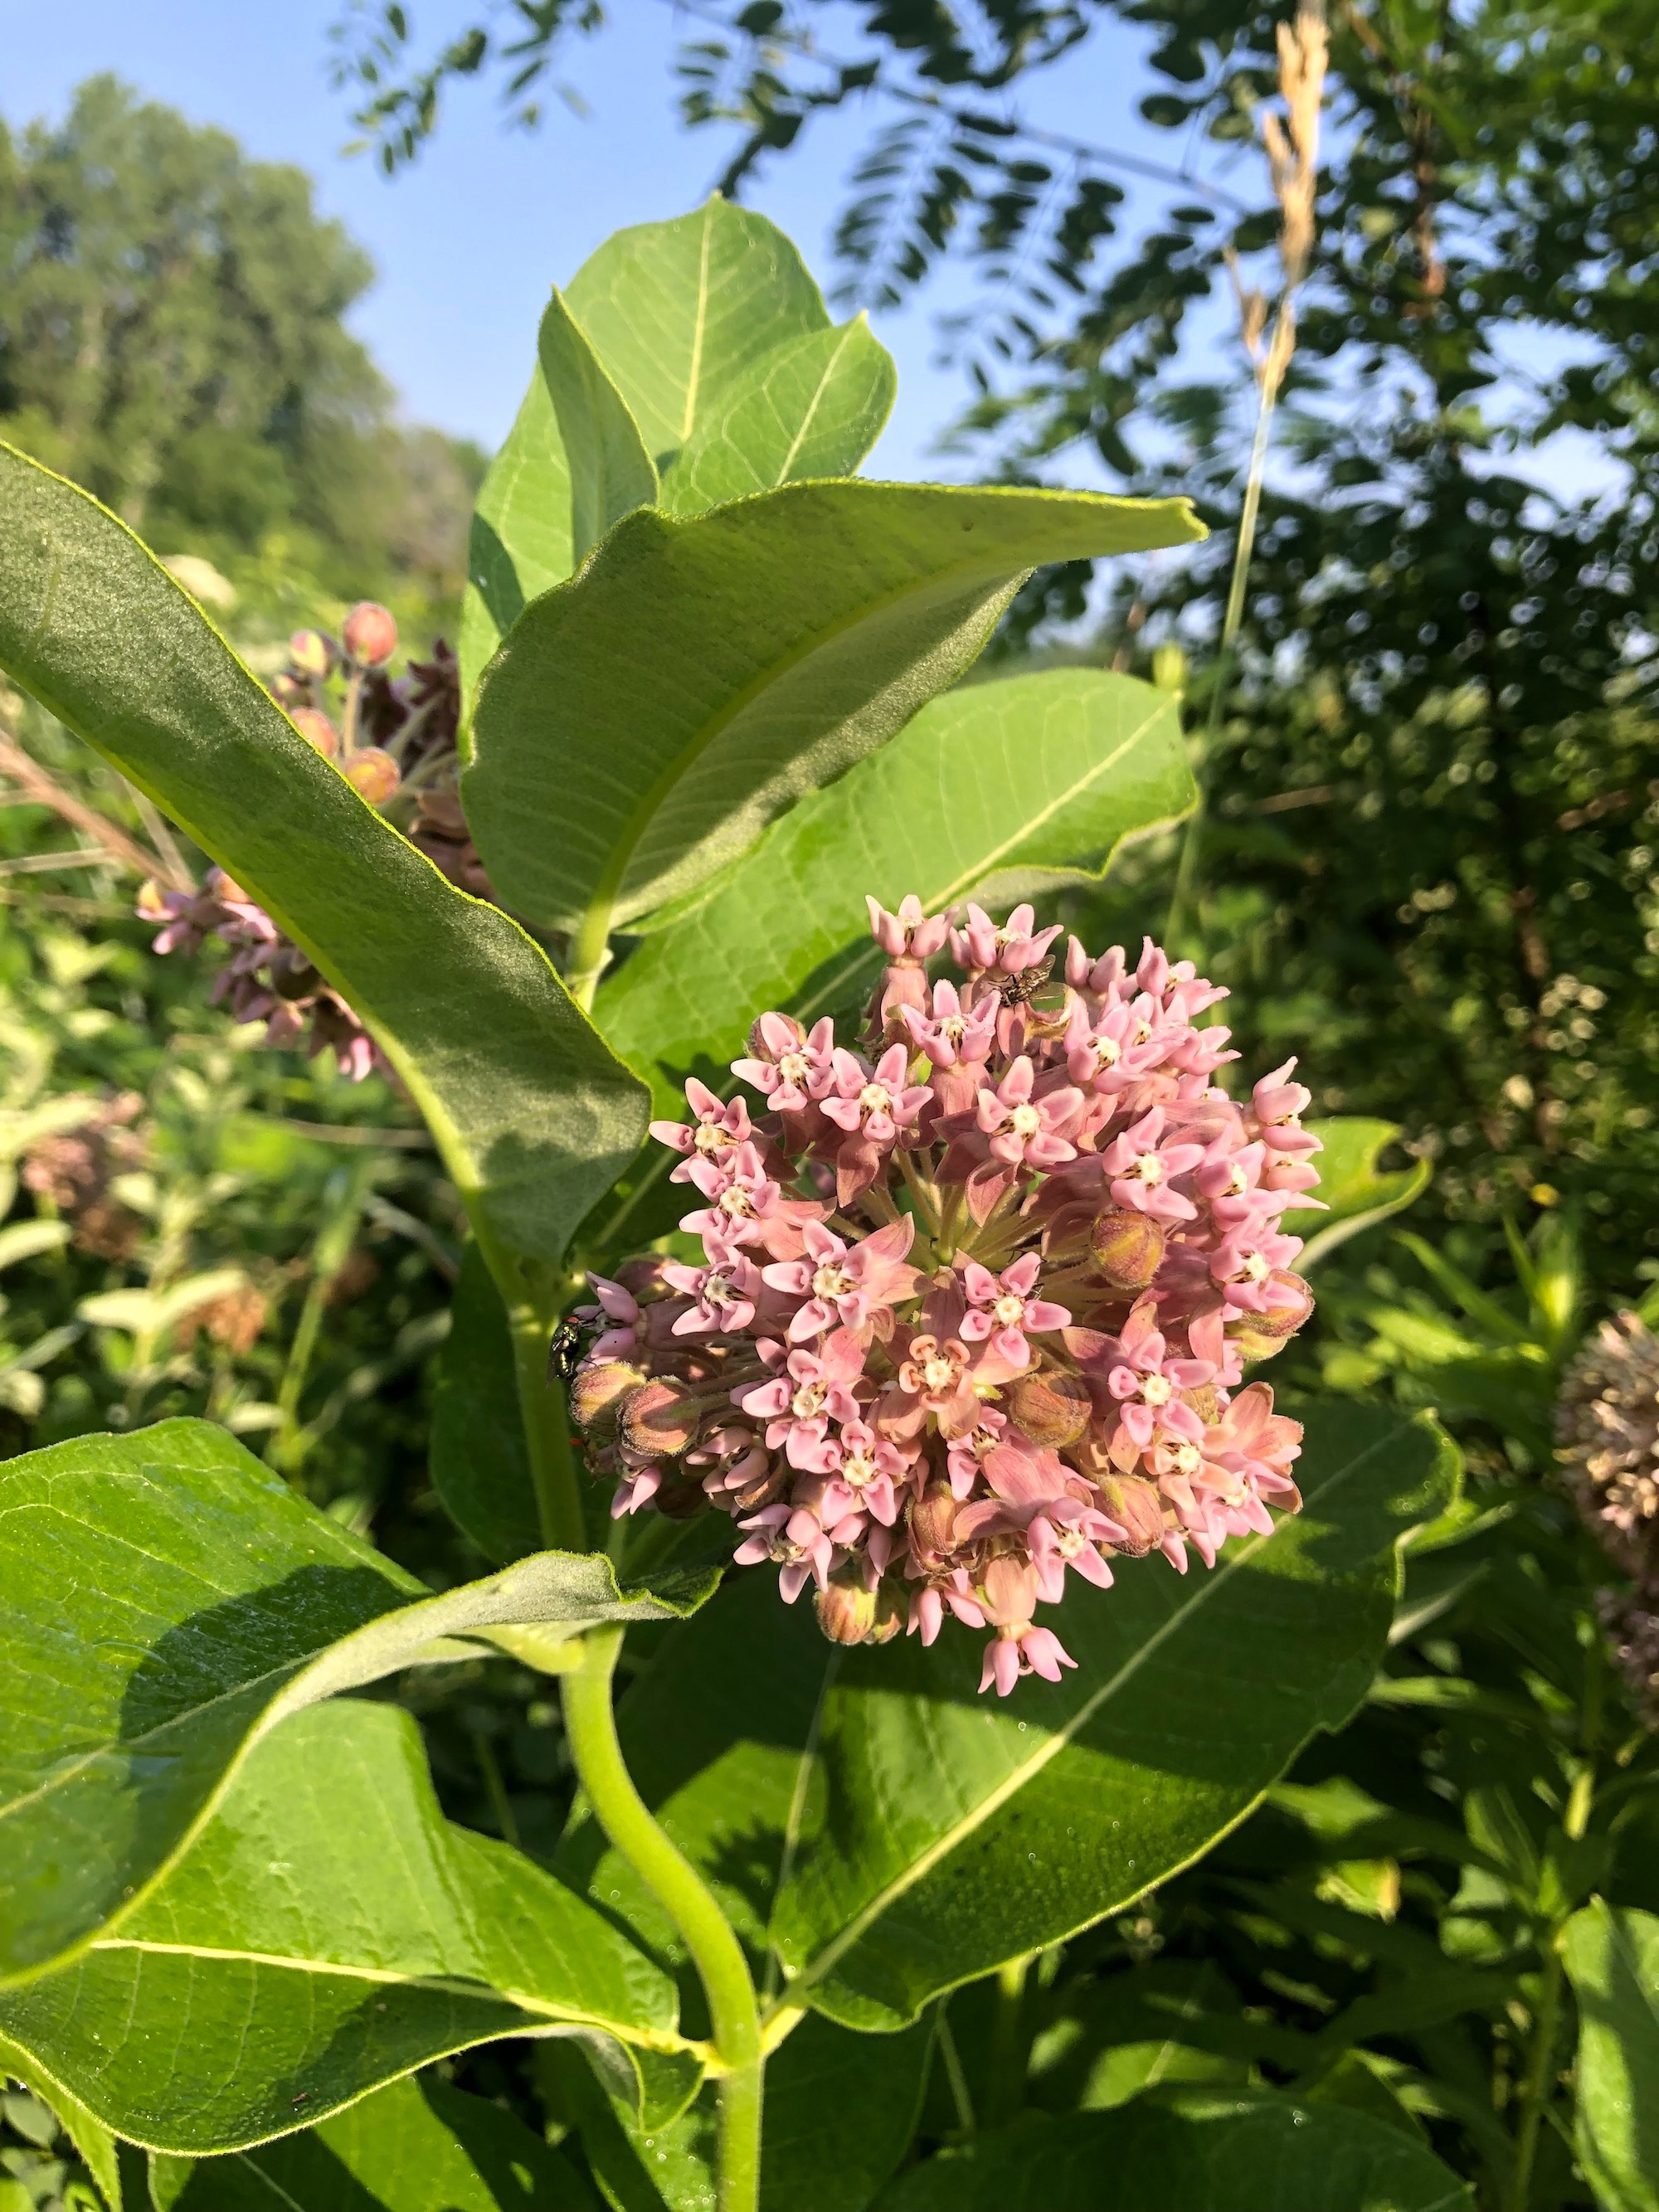 Common Milkweed on shore of Marion Dunn Pond on July 8, 2019.